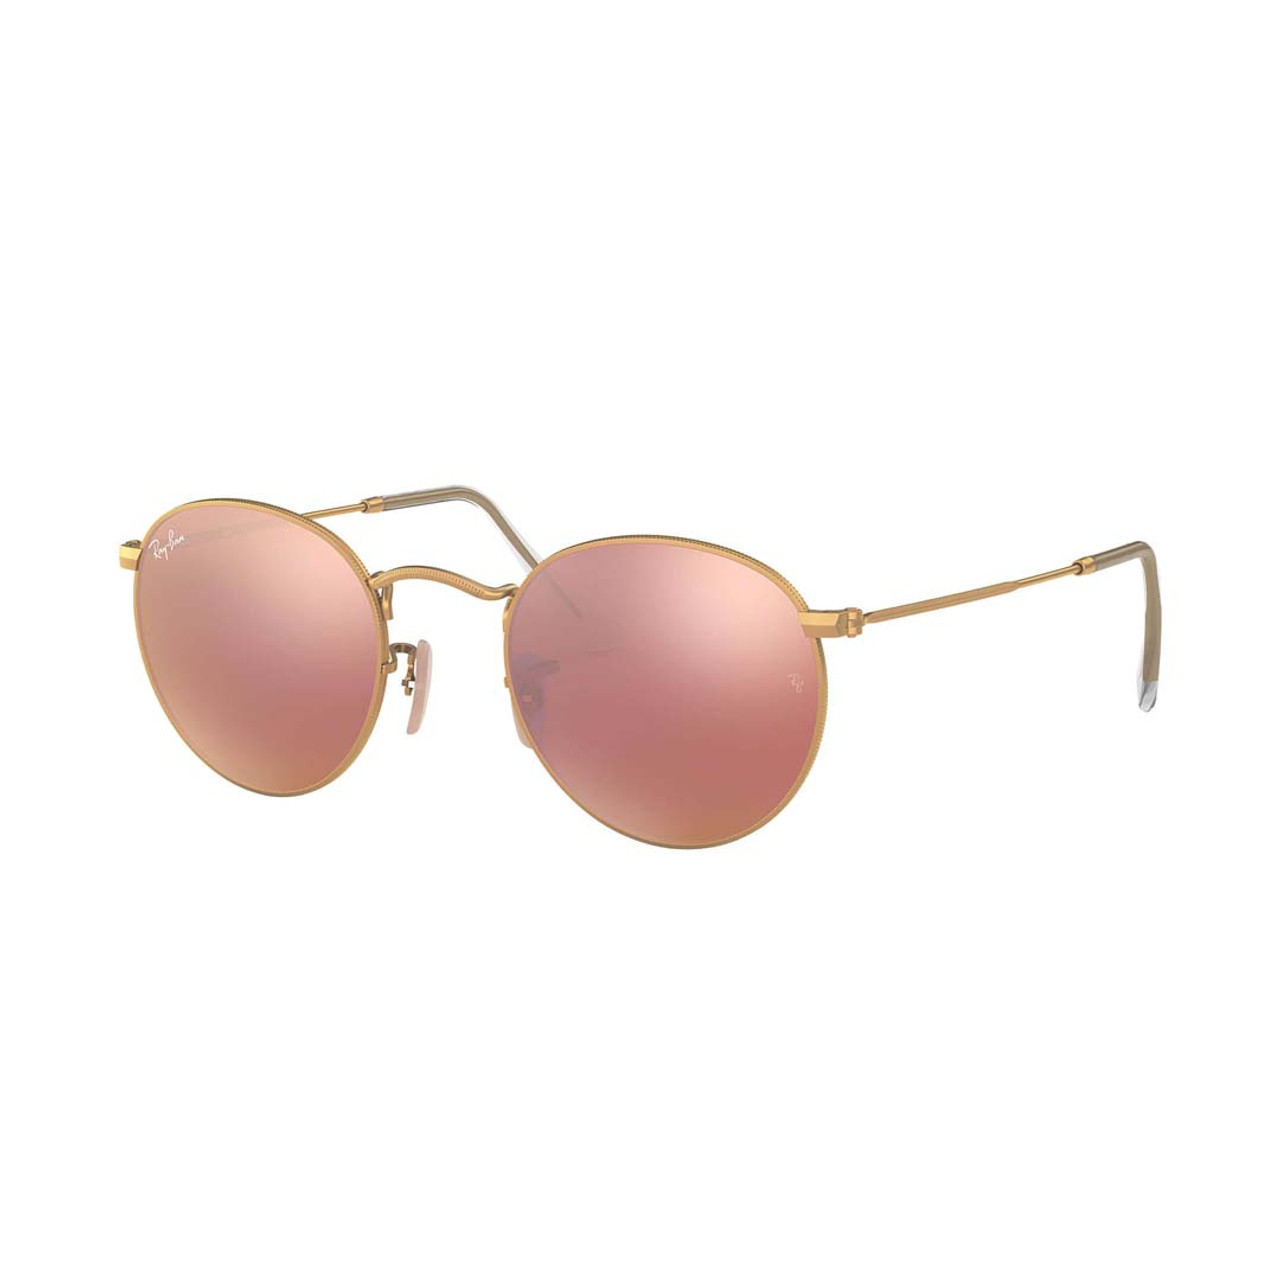 Ray-Ban Ray-Ban Round Flash Lenses Sunglasses - Gold/Copper Flash $ 188 |  TYLER'S